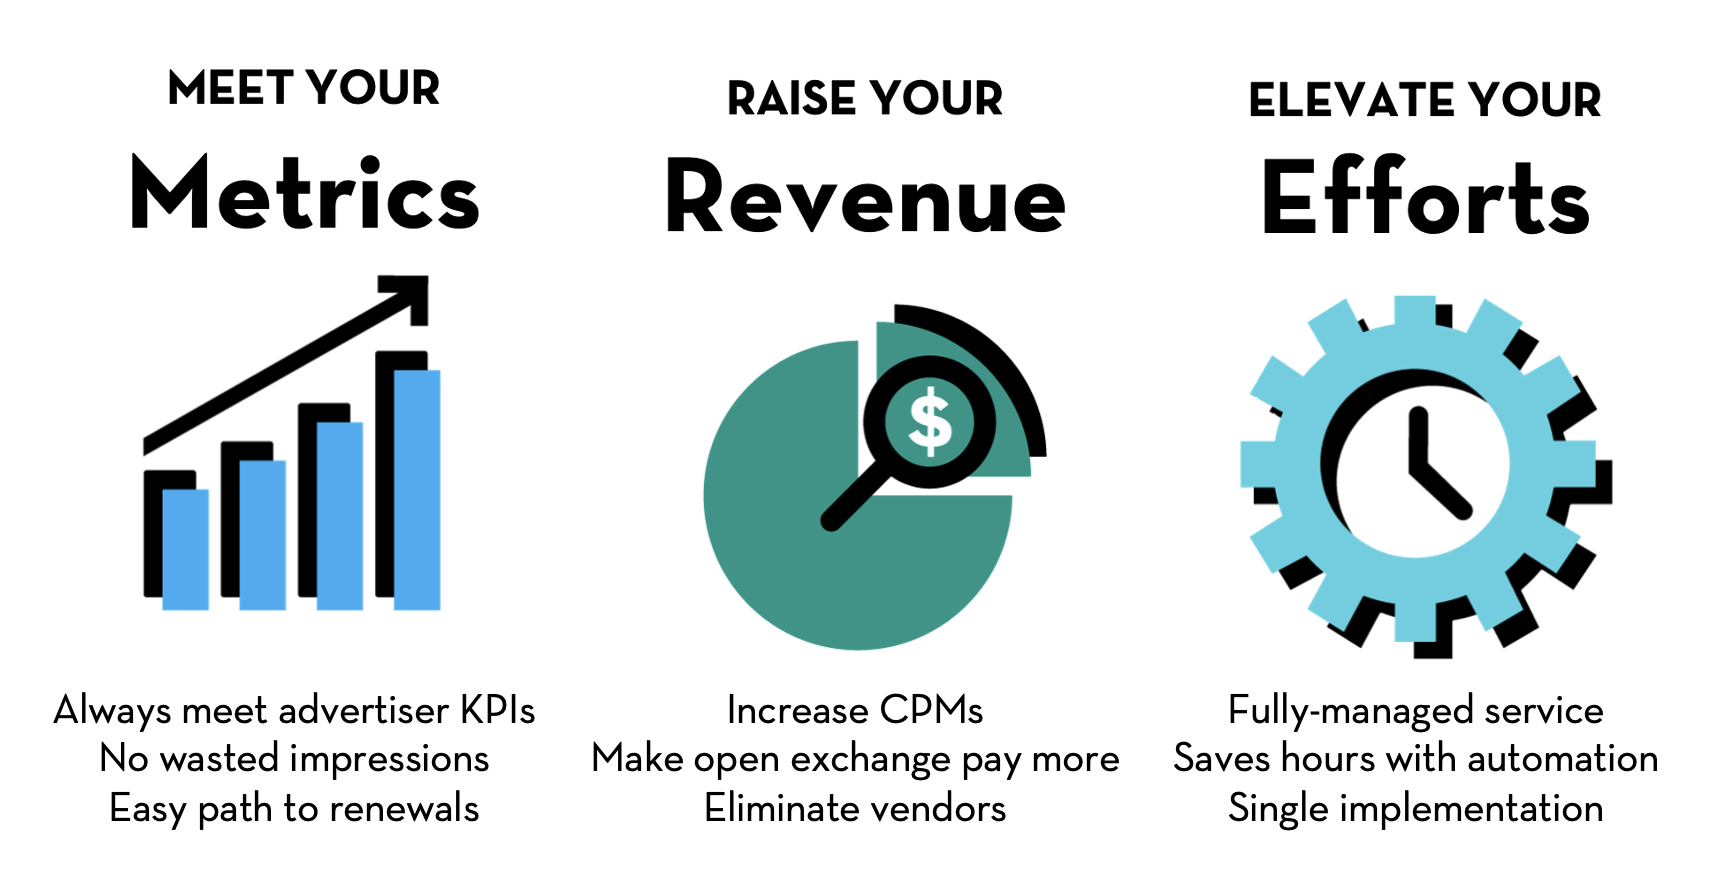 Meet your metrics: Always meet advertiser KPIs, no wasted impressions, easy path to renewals. Raise your revenue: Increase CPMs, make open exchange pay more, eliminate vendors. Elevate your efforts: fully-managed service, saves hours with automation, single implementation.